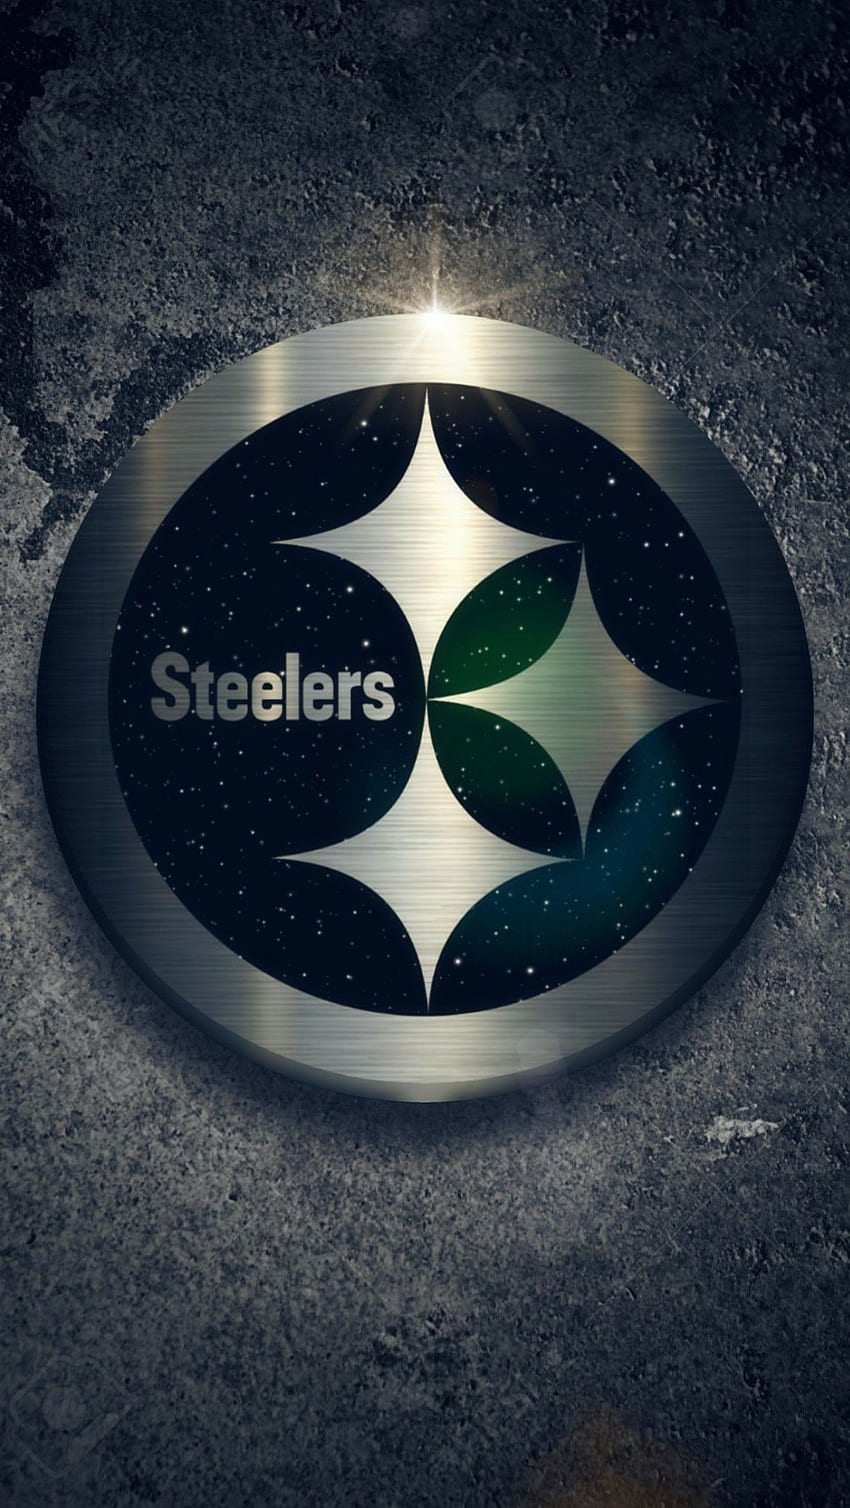 Aggregate more than 70 wallpaper steelers logo best - in.cdgdbentre